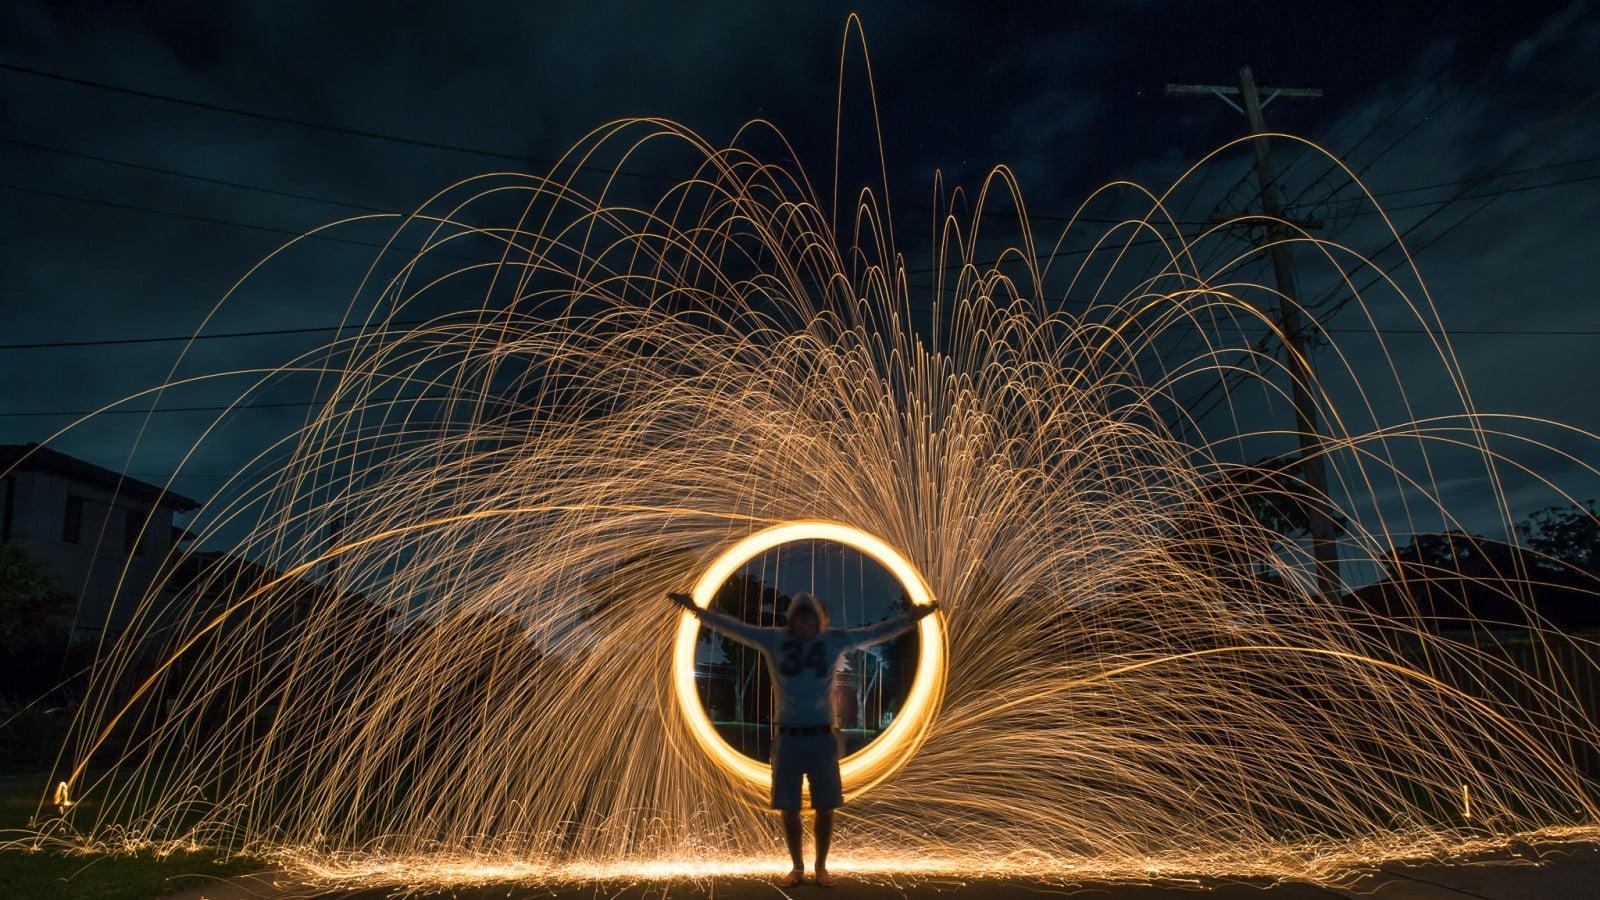 Sydney Steelwool Spin Photography